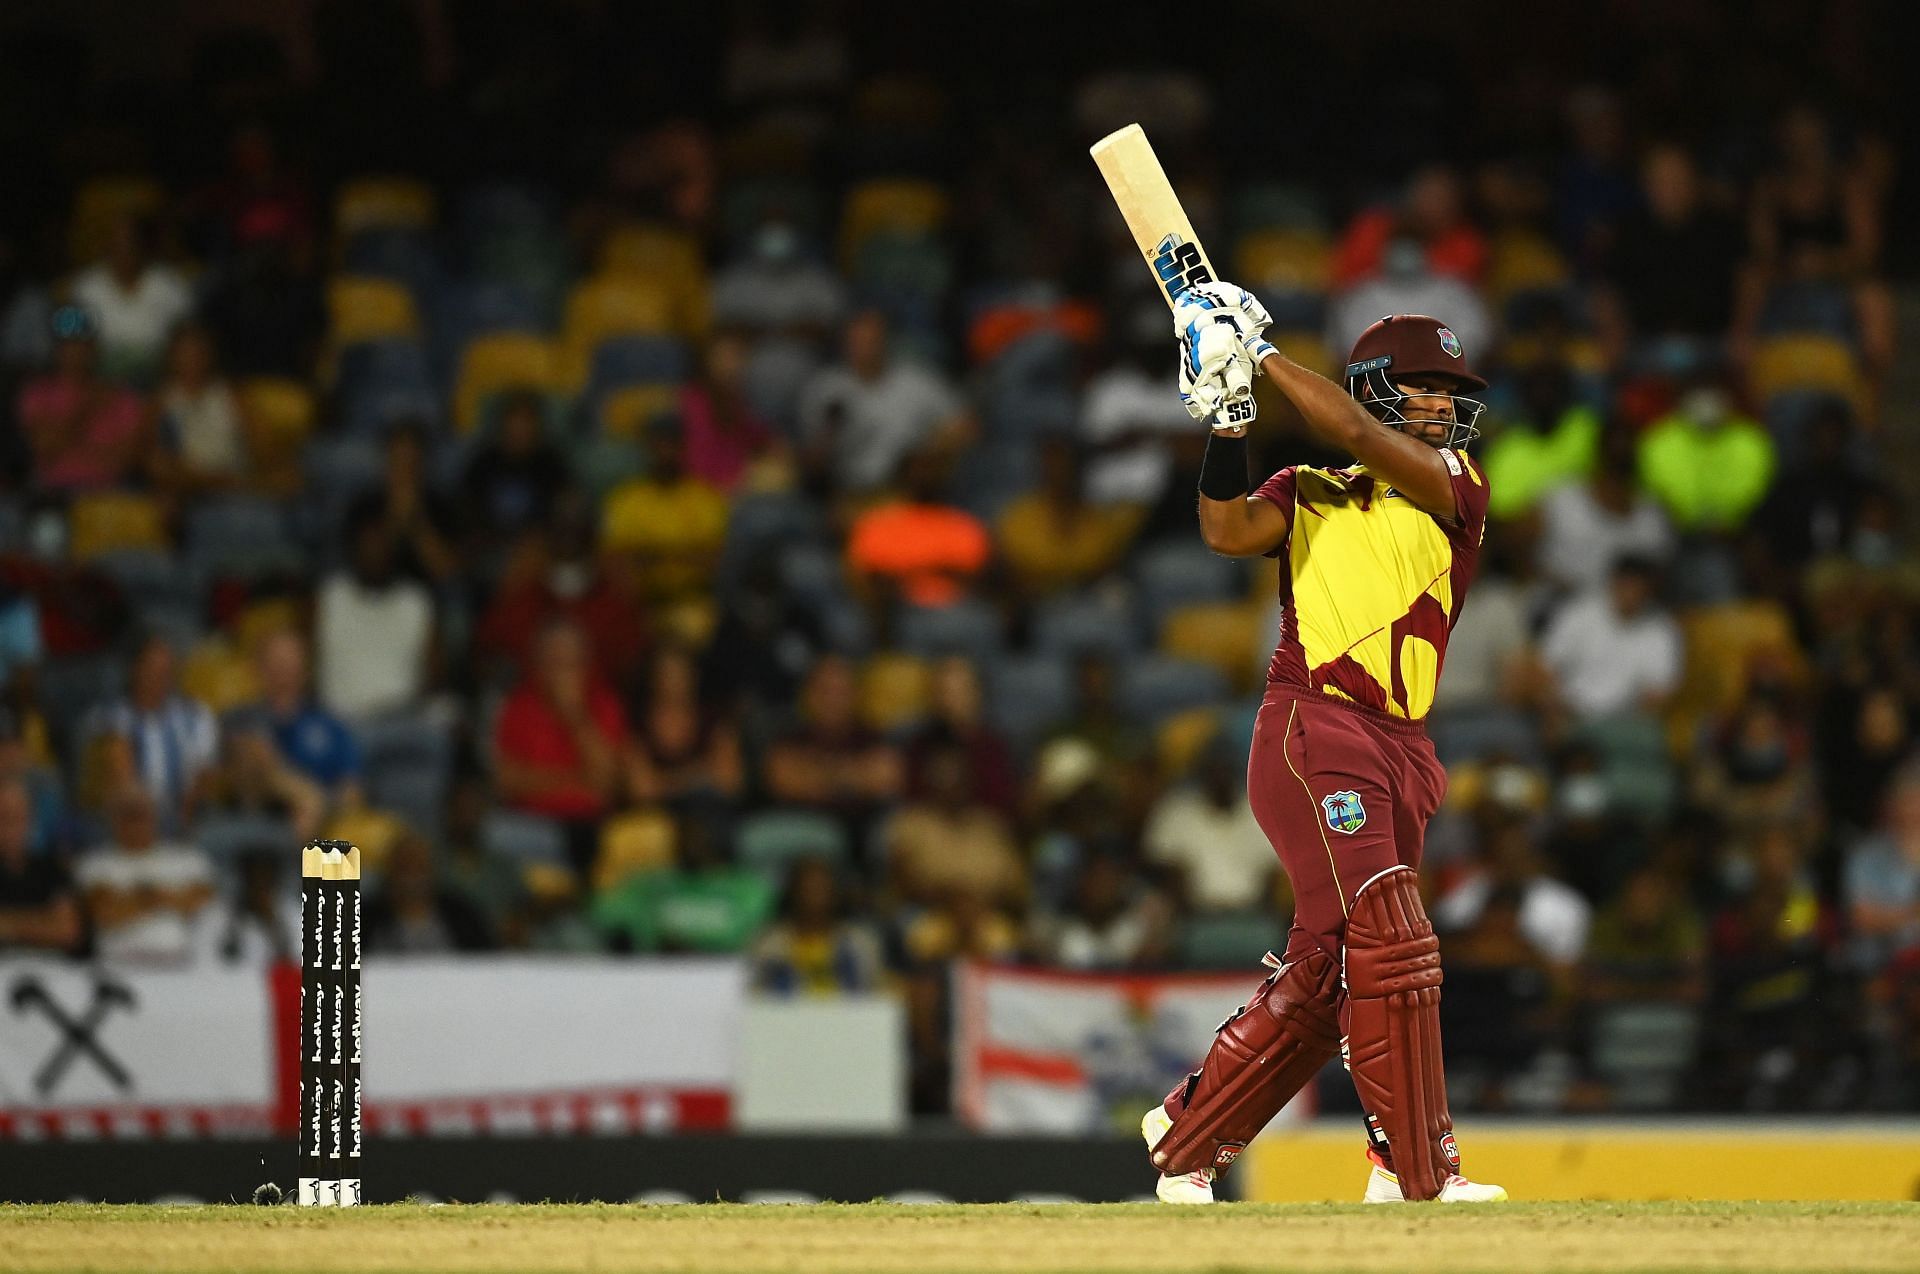 West Indies have already won the series with one match to go (Credit: Getty Images)